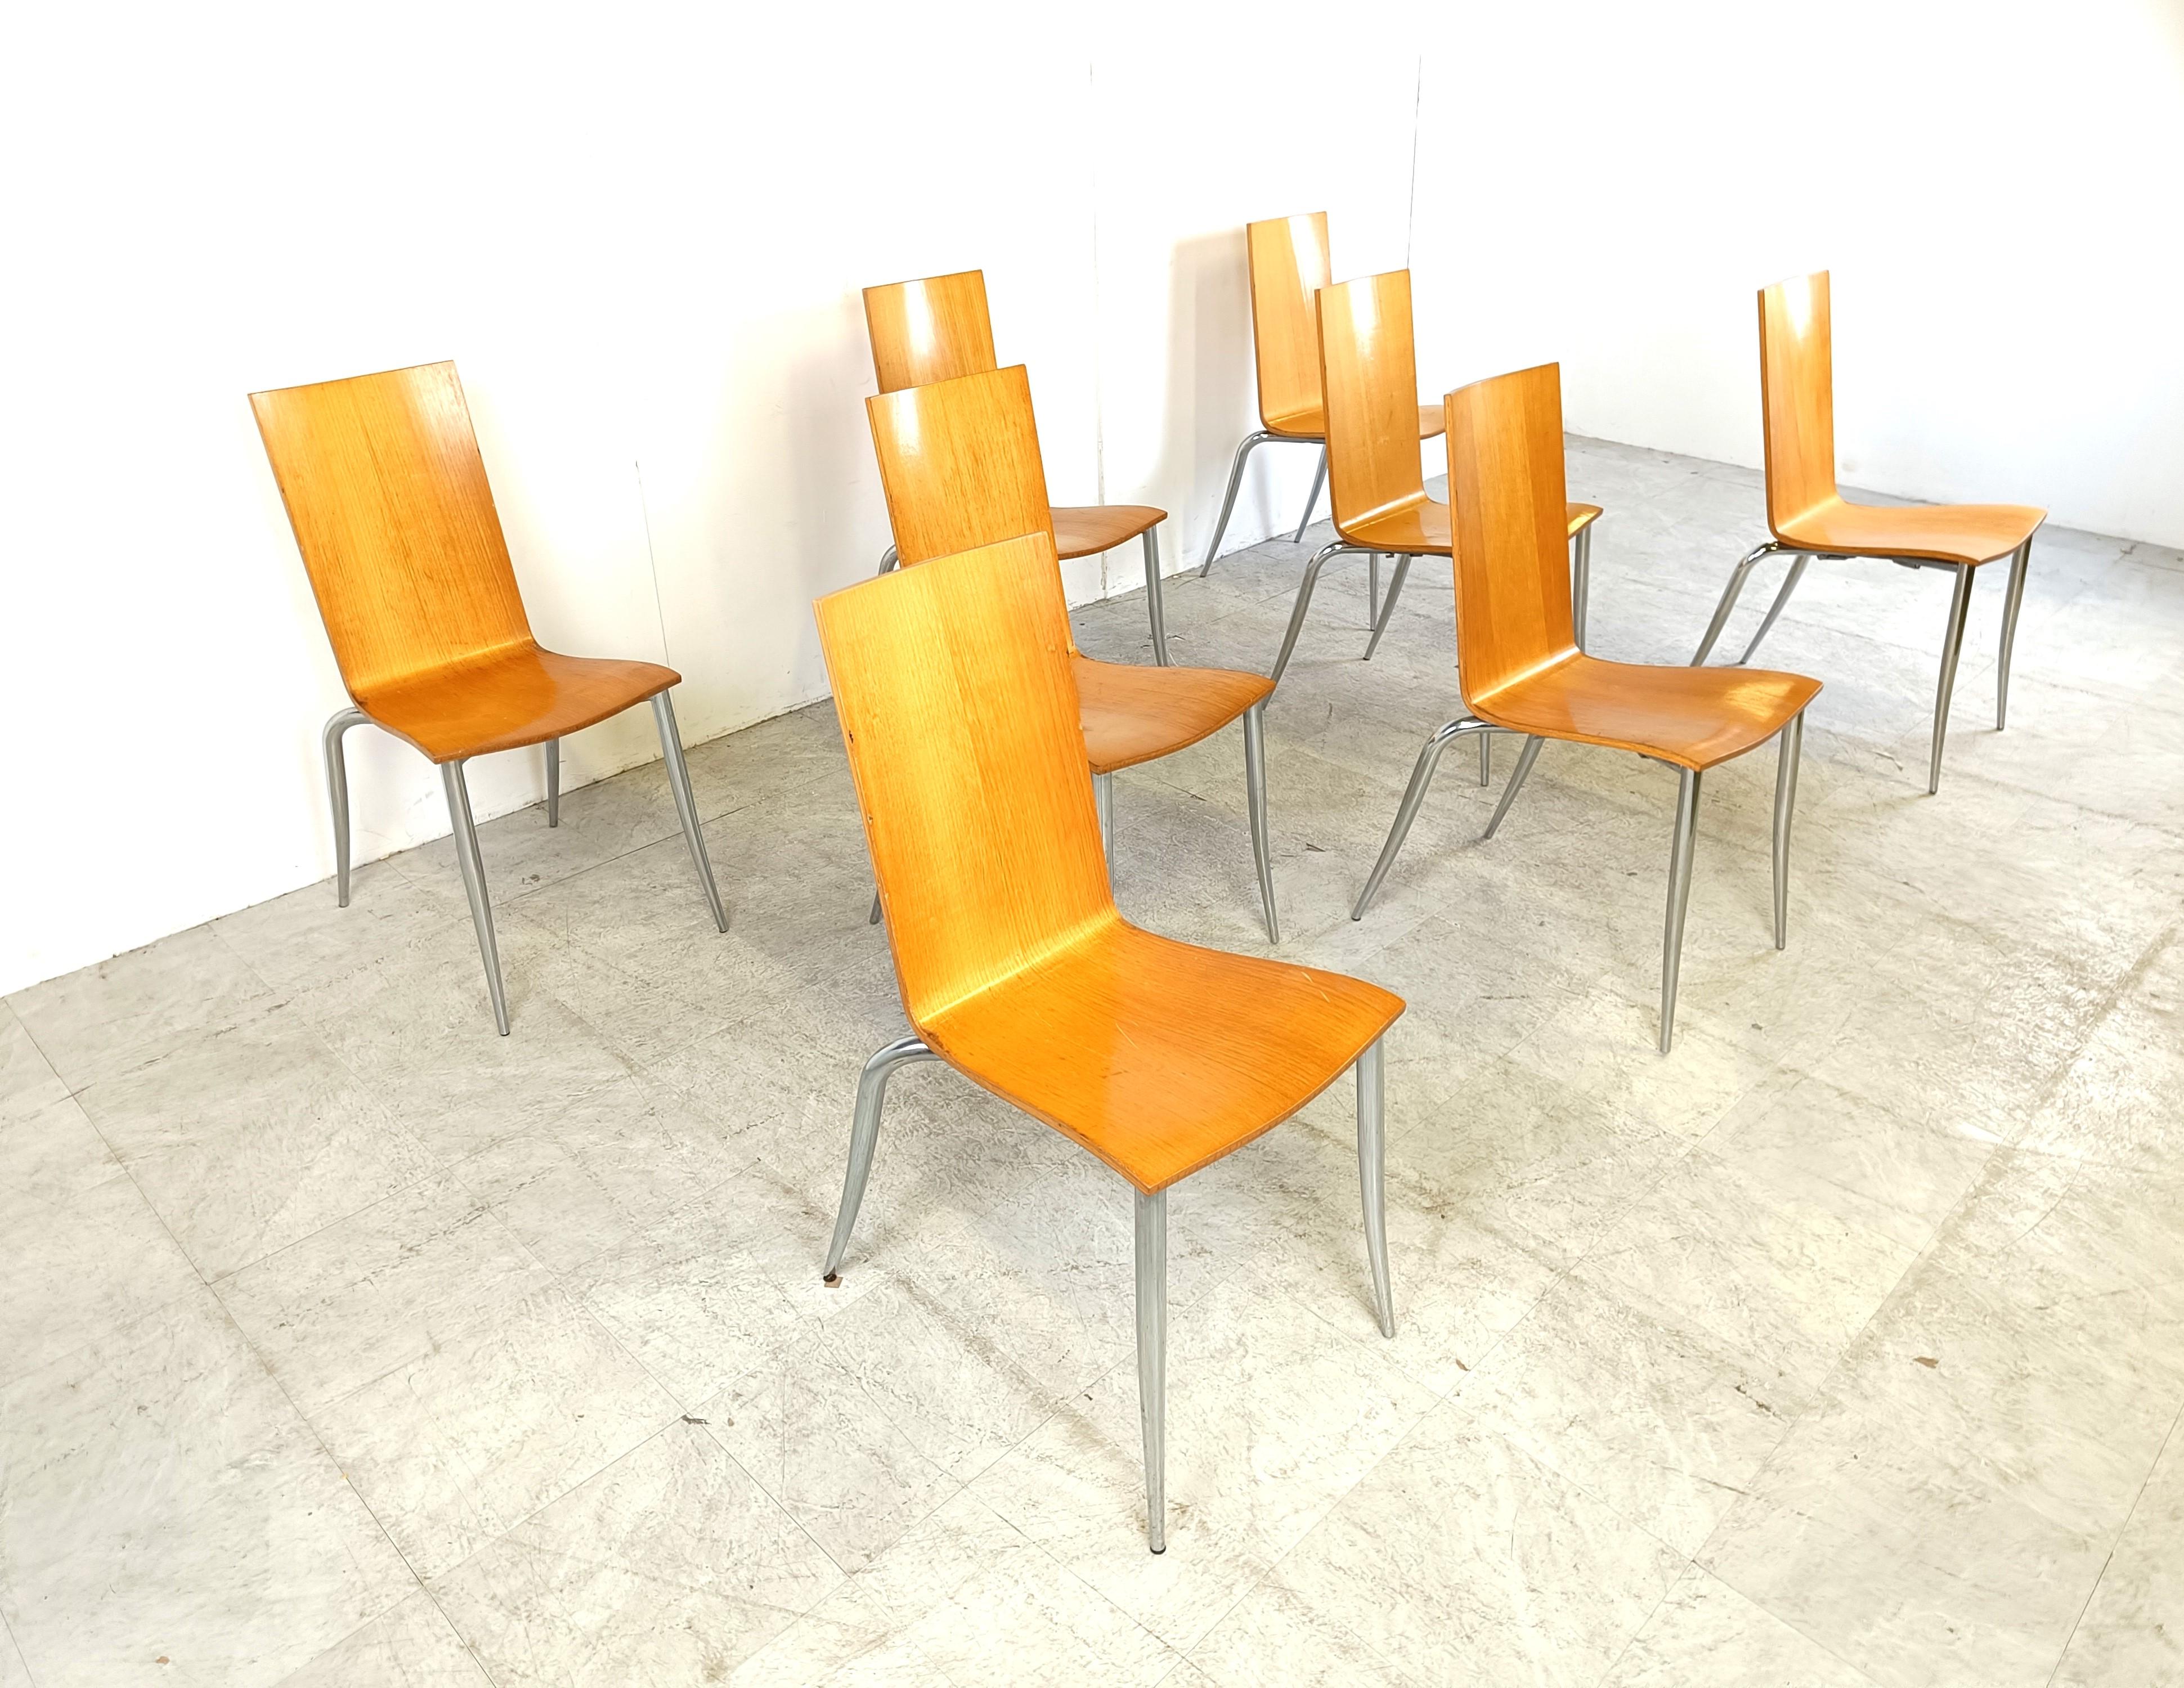 Italian Olly tango dining chairs by Philippe Starck for Aleph, 1990s set of 8